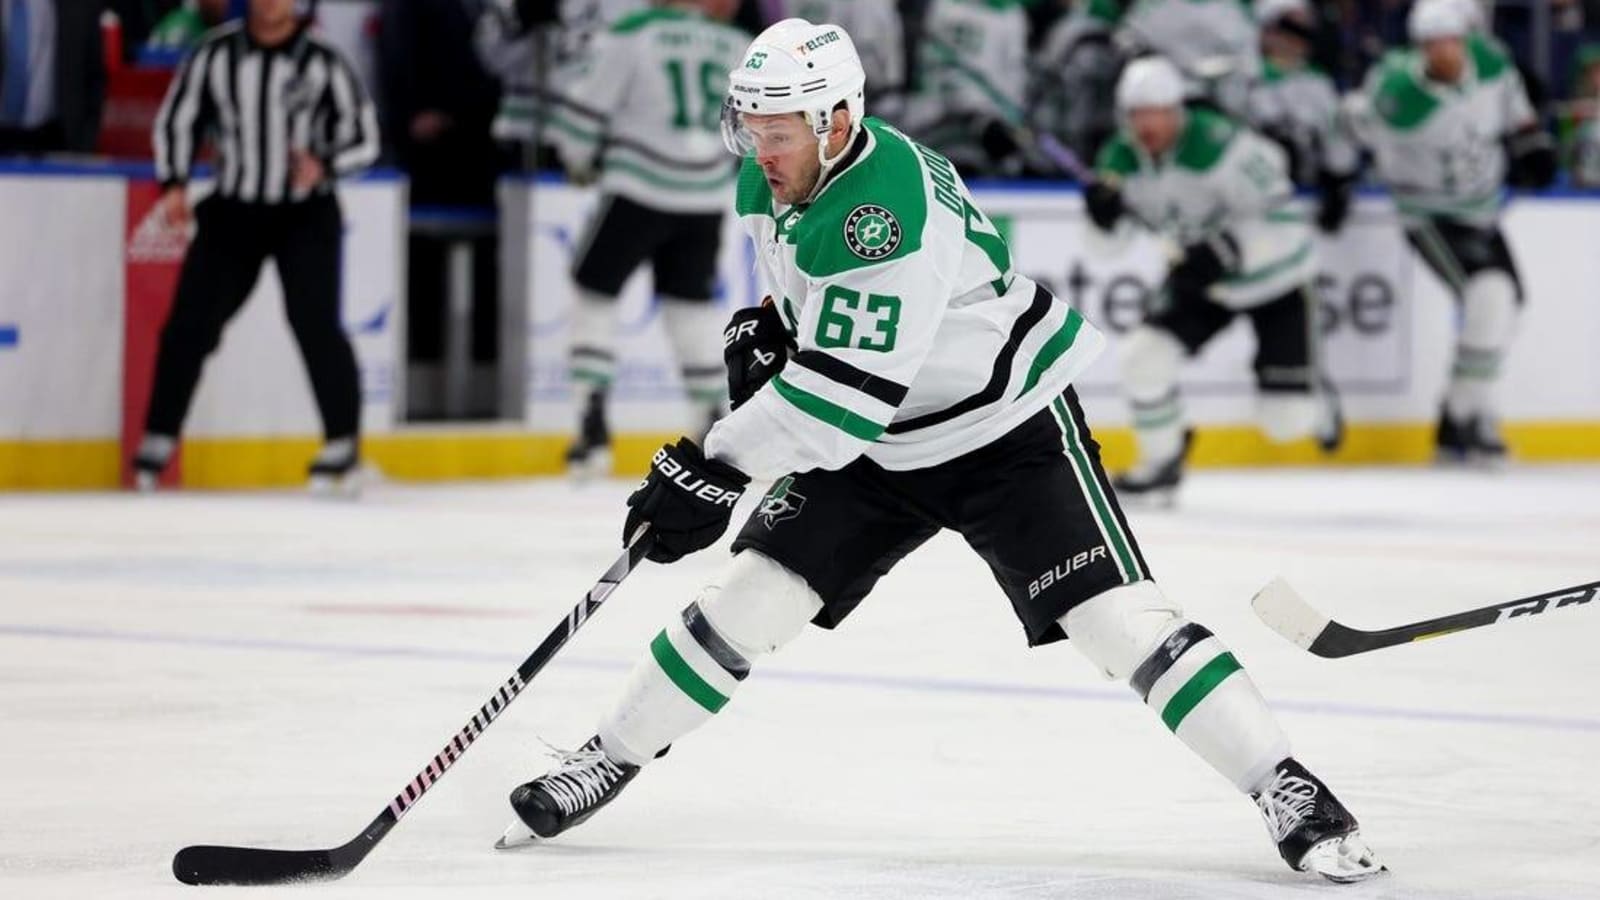 Stars have division sewn up, seek more in finale vs. Blues